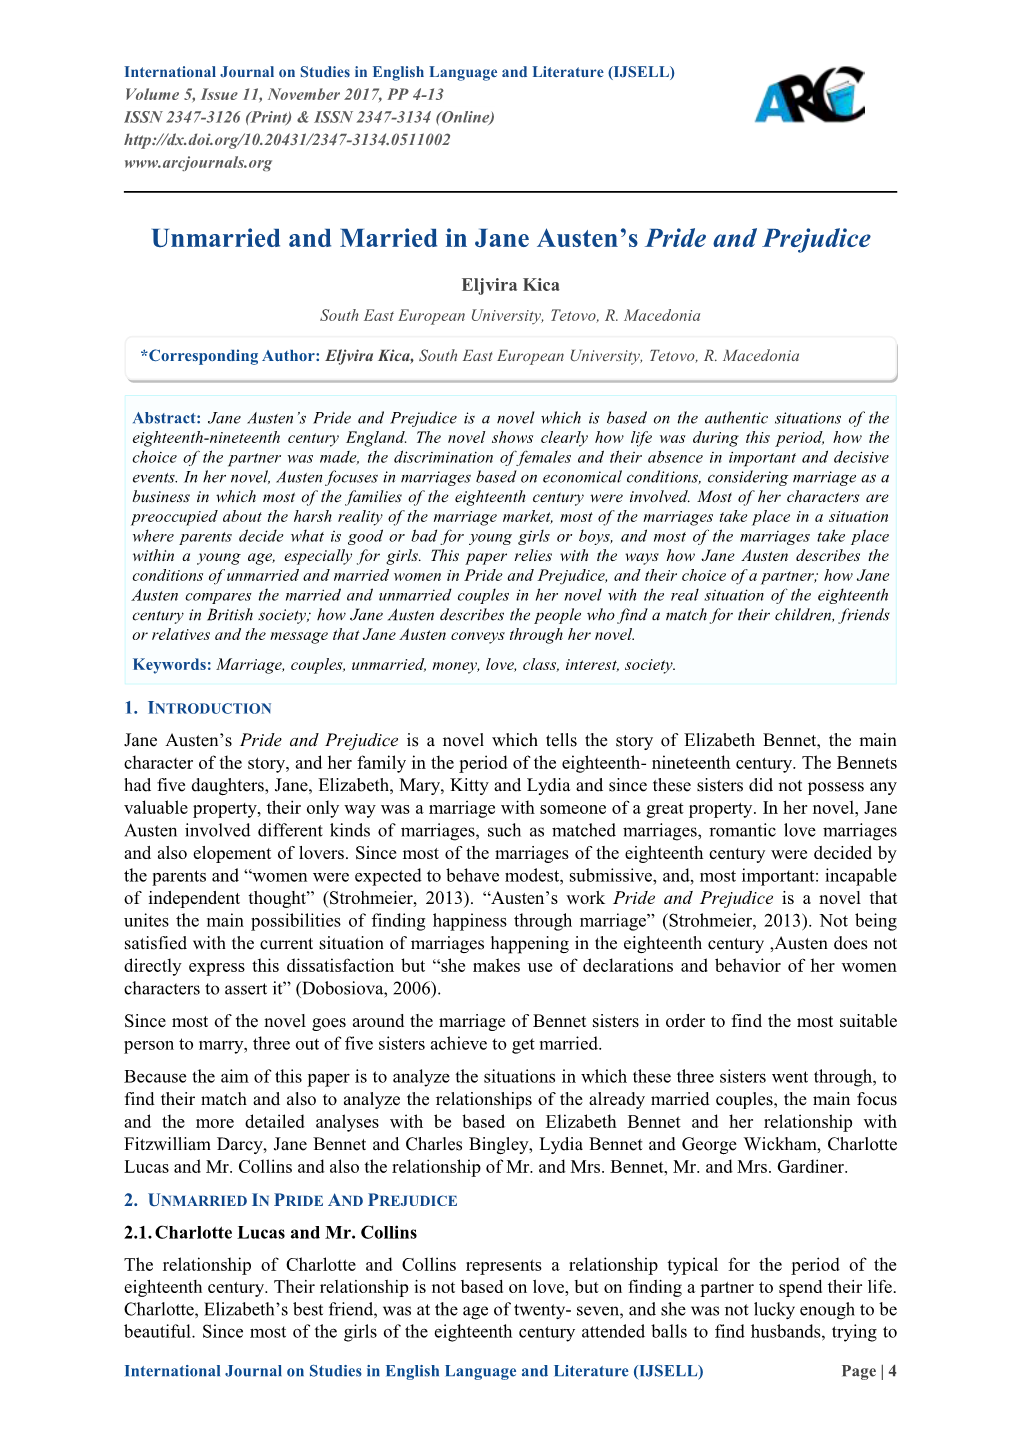 Unmarried and Married in Jane Austen's Pride and Prejudice